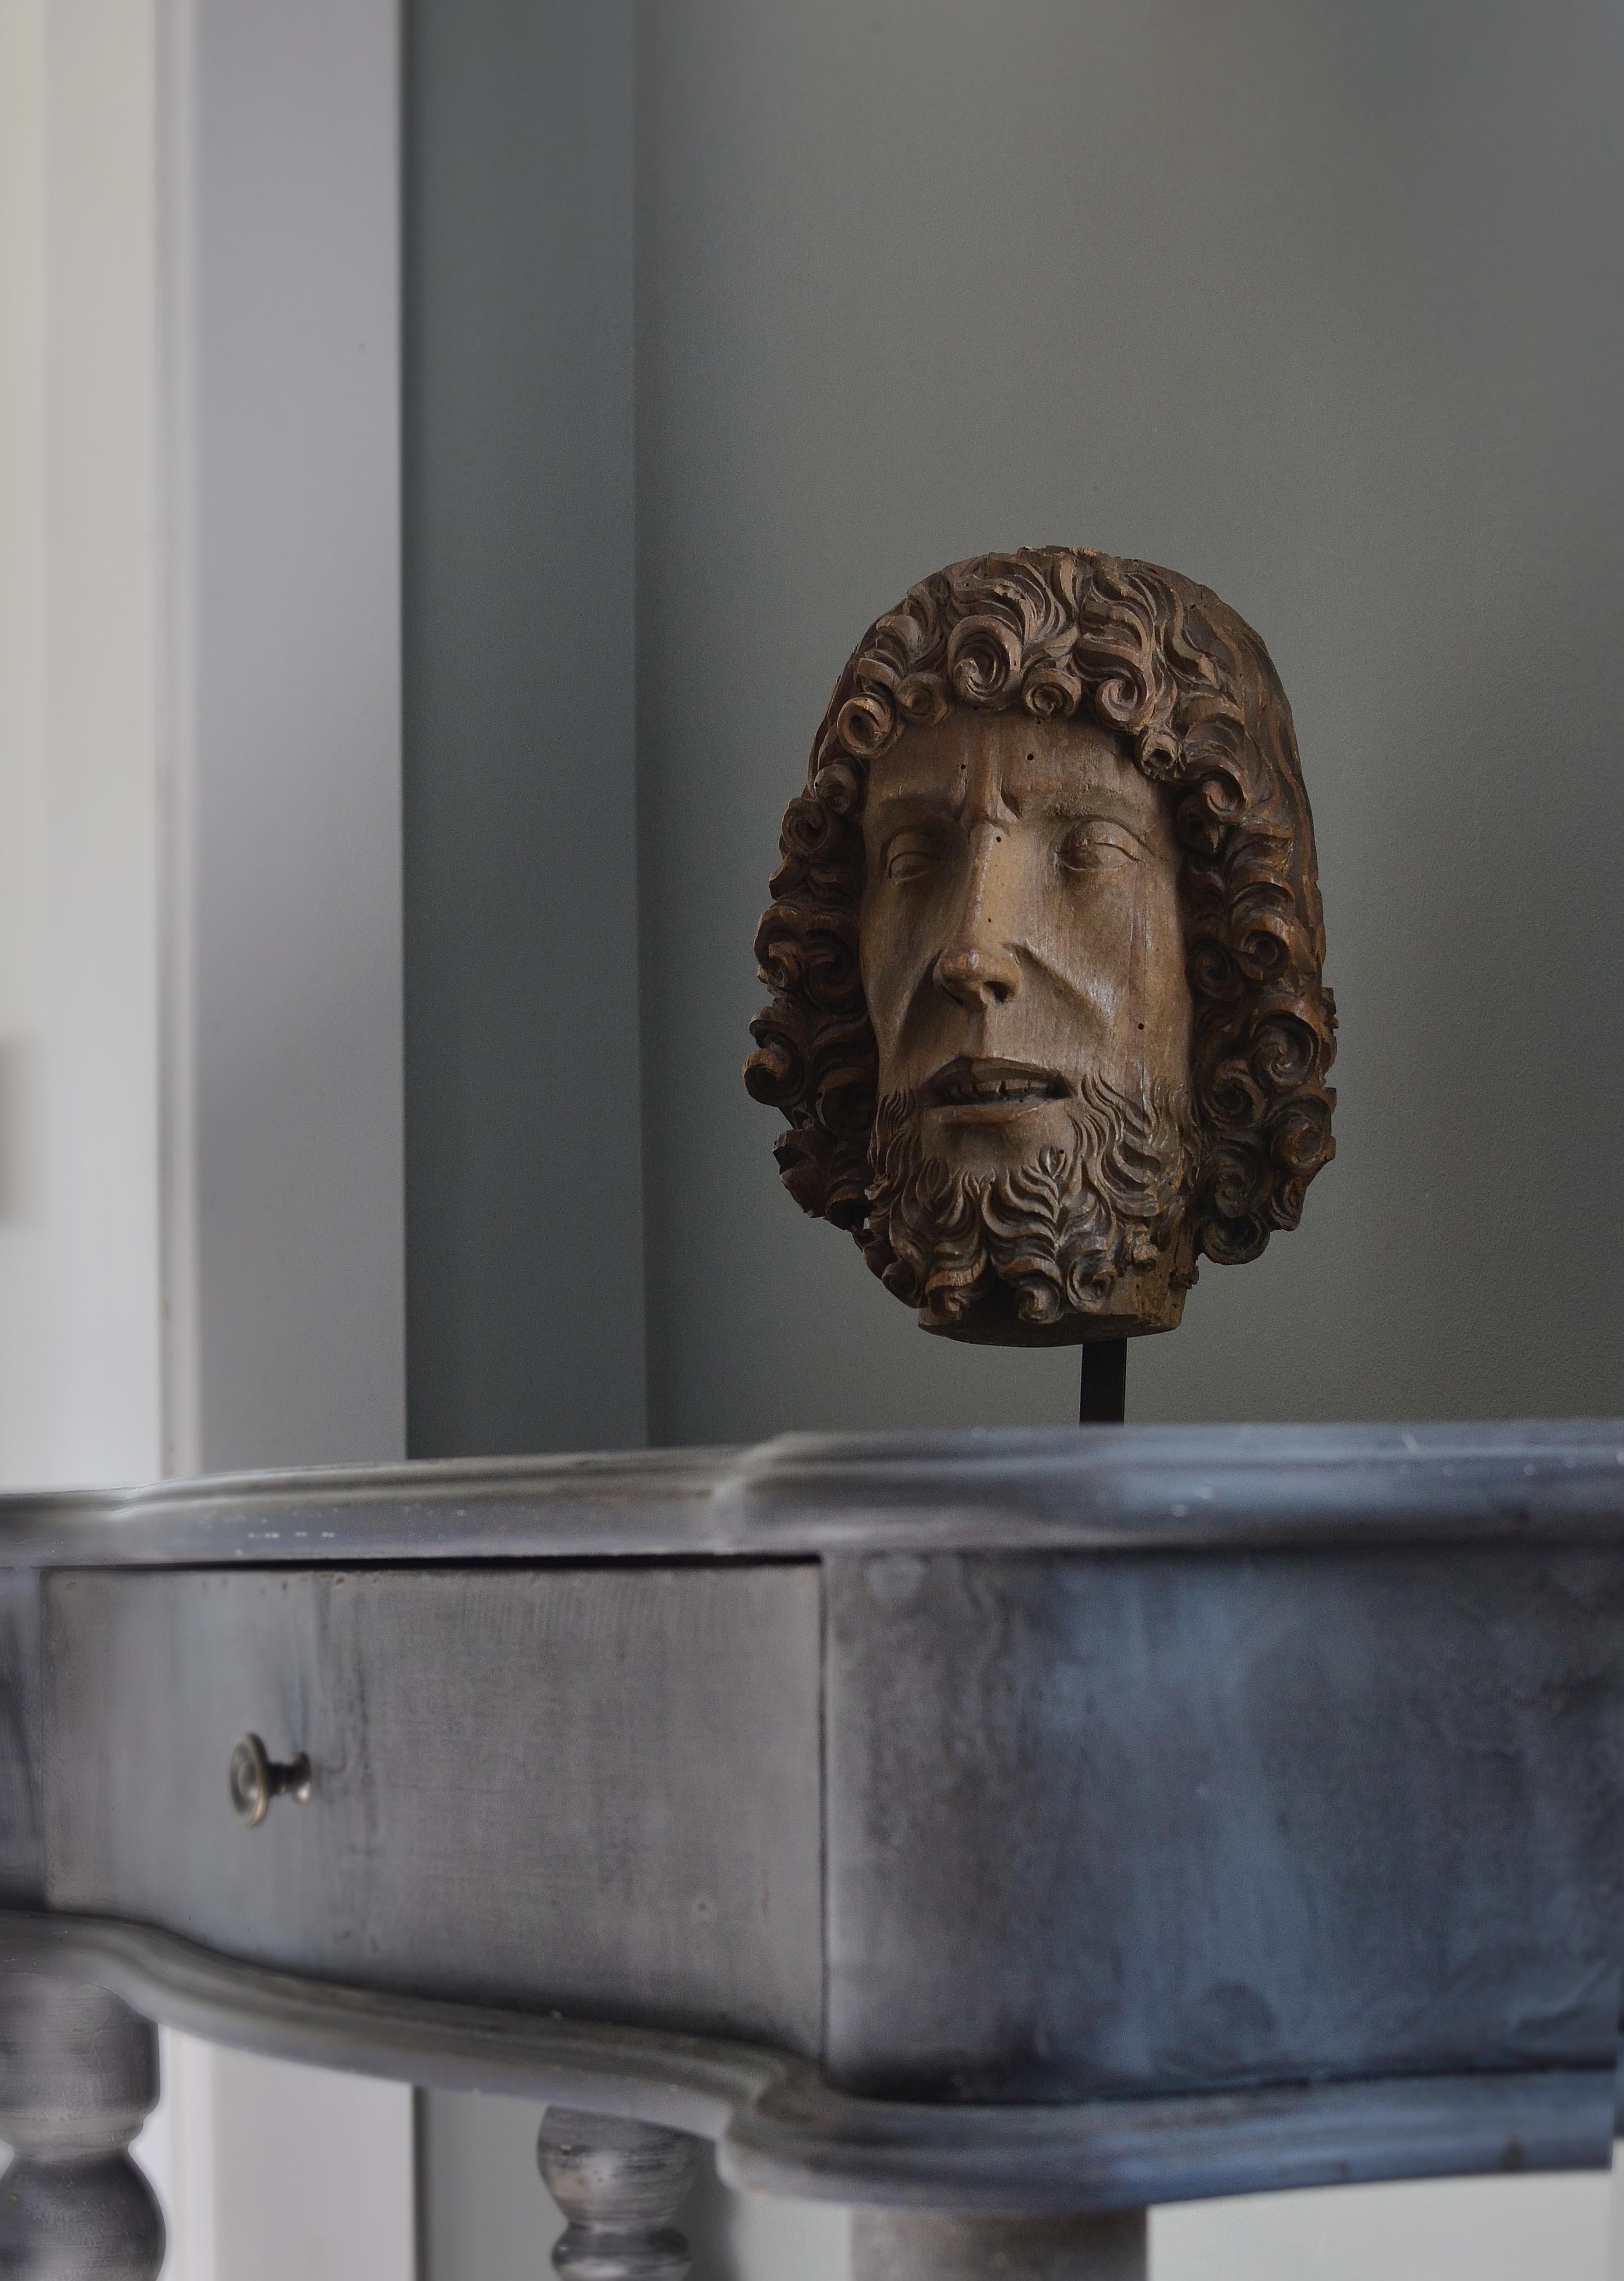 Head of John the Baptist

Bernt Notke and/or workshop
Lübeck, Germany, Stockholm, Sweden or the Baltics; circa. 1475-1500

Wood; approximate height: 23 cm

The present bust, presumably depicting John the Baptist and carved three-quarters